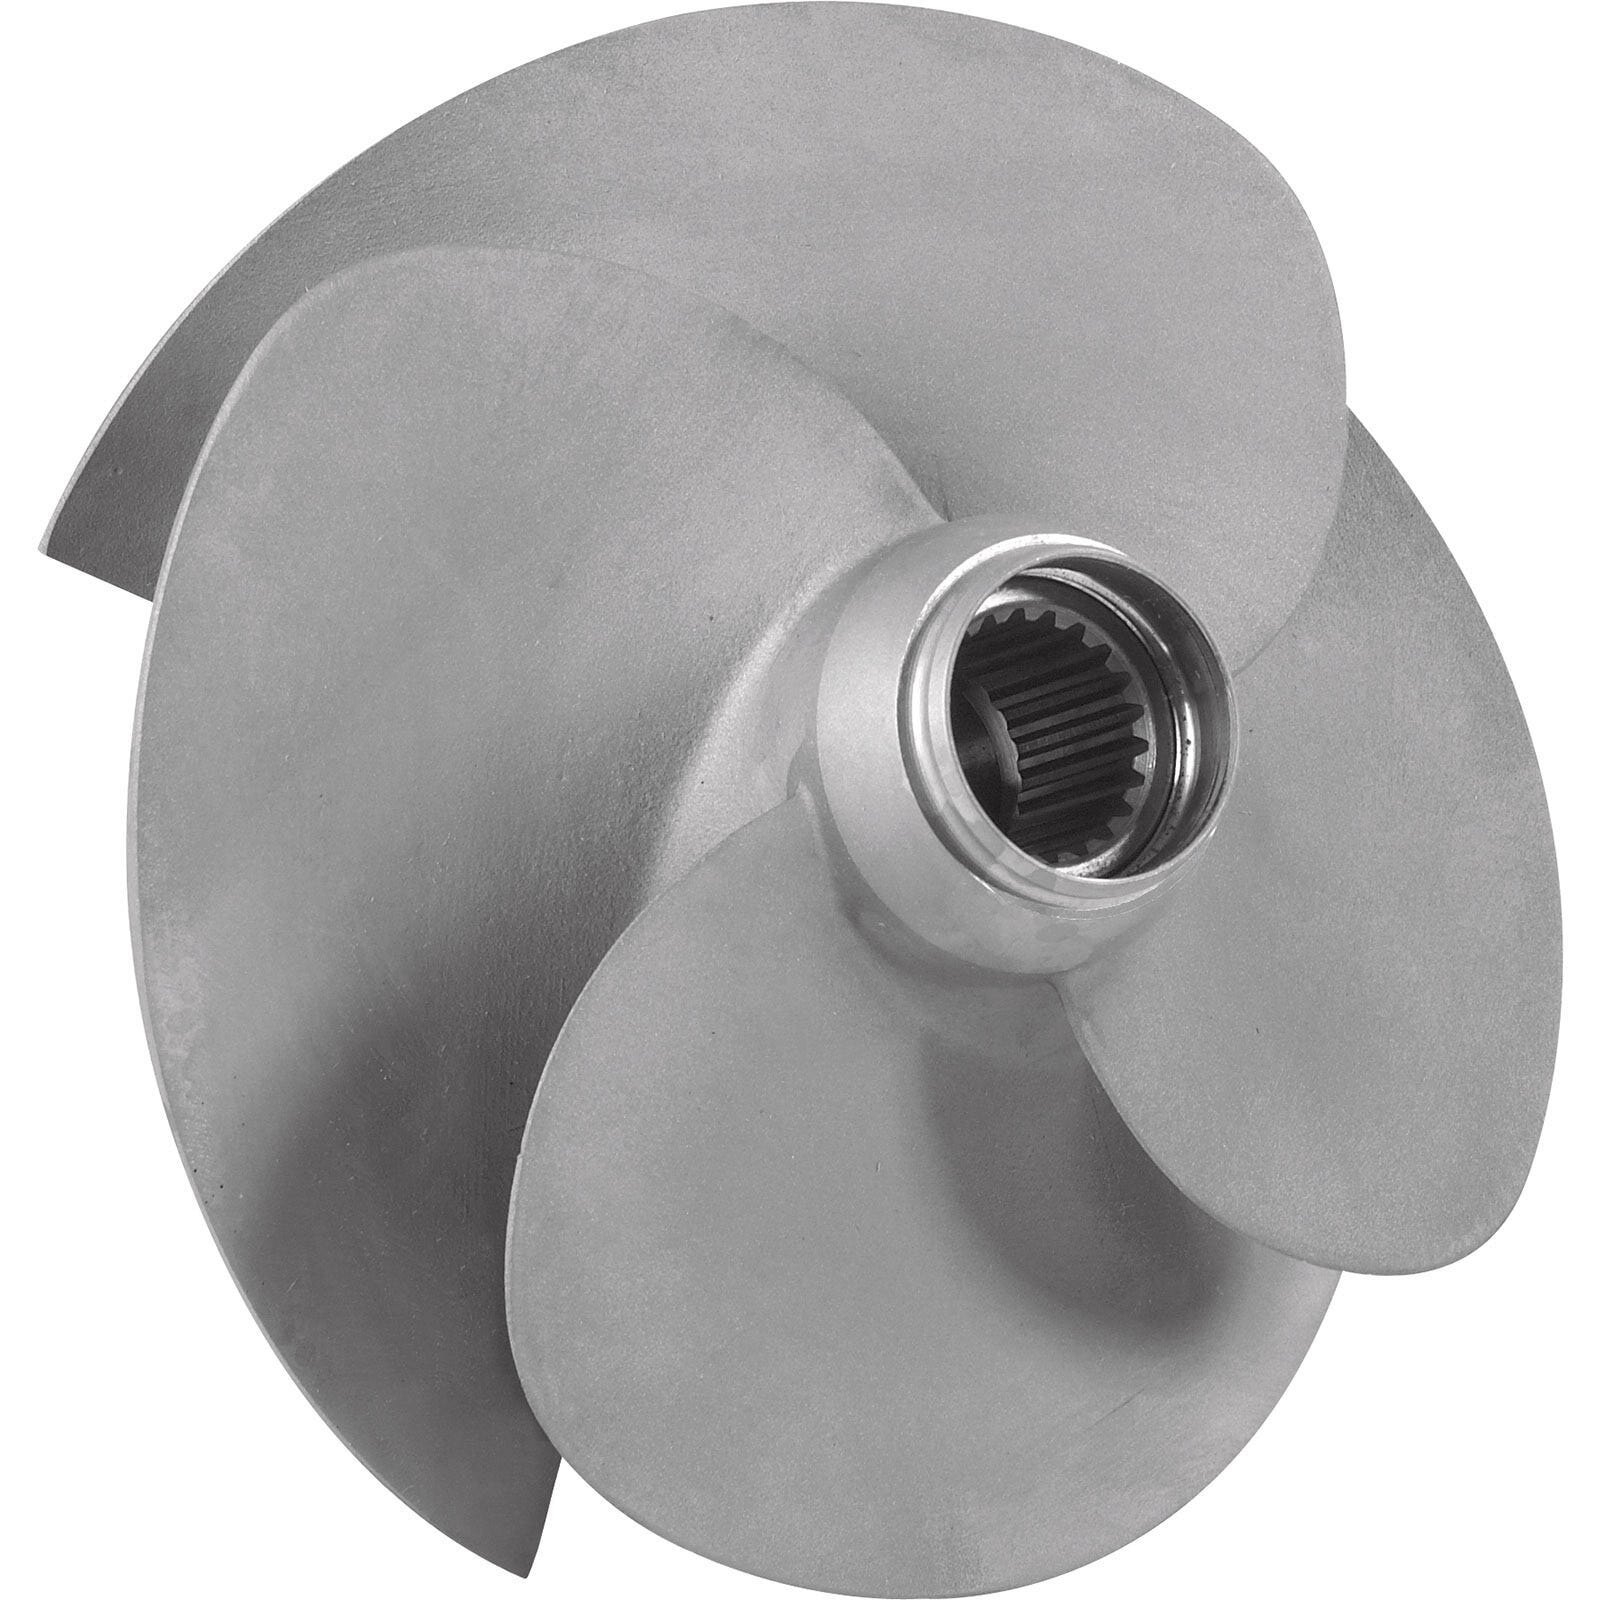 Gti 130 and Gti 155 (2009 2019), Gts 130 (2011 2016), Wake 155 (2011 2017) Impeller